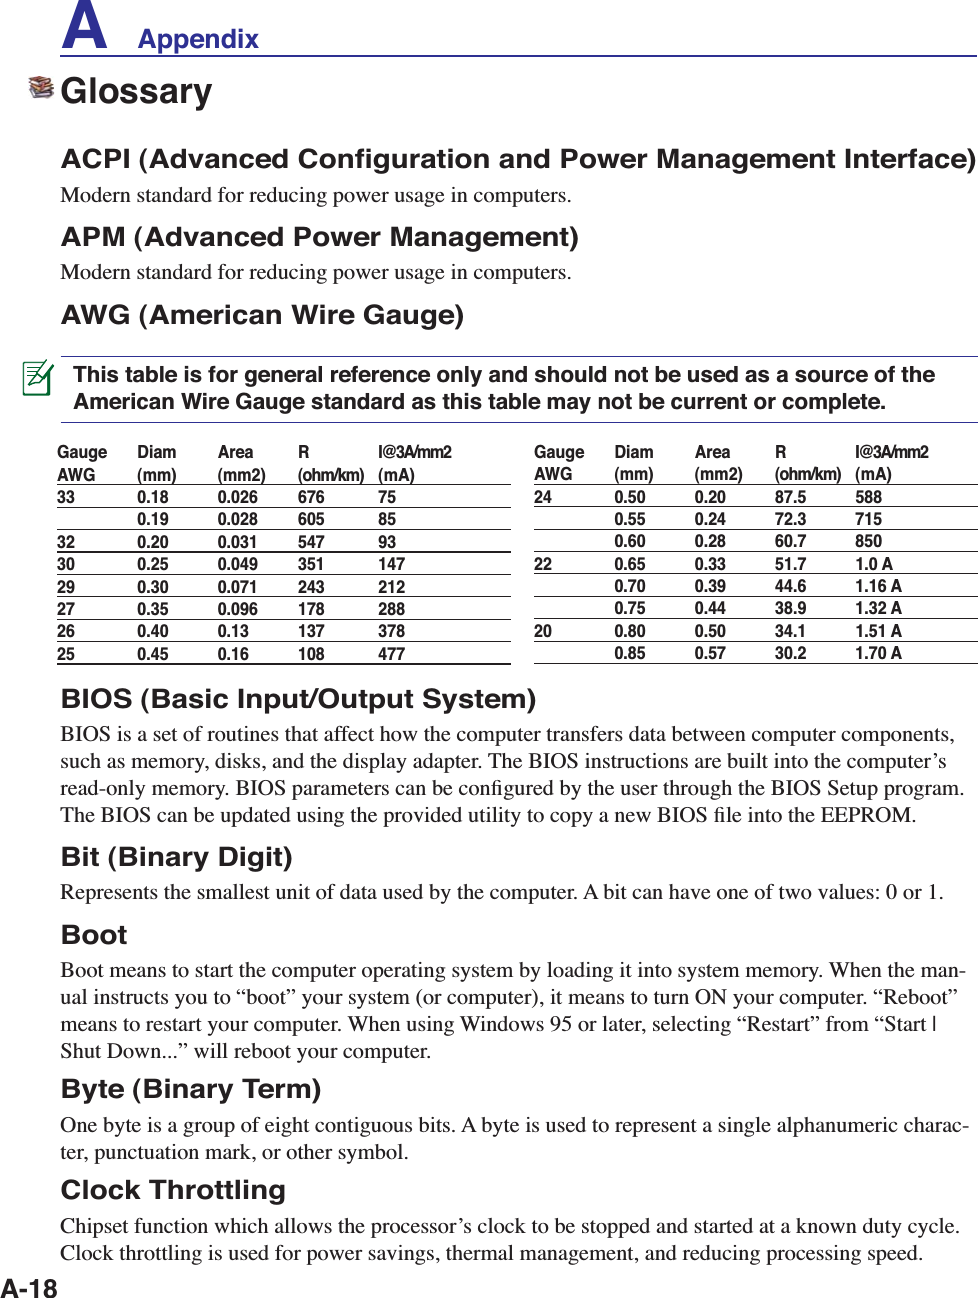 A-18GlossaryACPI (Advanced Conﬁguration and Power Management Interface)Modern standard for reducing power usage in computers.APM (Advanced Power Management)Modern standard for reducing power usage in computers.AWG (American Wire Gauge)This table is for general reference only and should not be used as a source of the American Wire Gauge standard as this table may not be current or complete.Gauge Diam  Area  R  I@3A/mm2AWG (mm) (mm2) (ohm/km)  (mA) 33 0.18 0.026 676 75    0.19  0.028  605  85 32 0.20 0.031 547 93 30 0.25 0.049 351 147 29 0.30 0.071 243 212 27 0.35 0.096 178 288 26  0.40 0.13 137  37825  0.45 0.16 108  477 Gauge Diam  Area  R  I@3A/mm2AWG (mm) (mm2) (ohm/km)  (mA)24  0.50 0.20 87.5 588   0.55 0.24 72.3 715   0.60 0.28 60.7 85022  0.65 0.33 51.7 1.0 A   0.70 0.39 44.6 1.16 A   0.75 0.44 38.9 1.32 A20  0.80 0.50 34.1 1.51 A   0.85 0.57 30.2 1.70 ABIOS (Basic Input/Output System)BIOS is a set of routines that affect how the computer transfers data between computer components, such as memory, disks, and the display adapter. The BIOS instructions are built into the computerʼs read-only memory. BIOS parameters can be conﬁgured by the user through the BIOS Setup program. The BIOS can be updated using the provided utility to copy a new BIOS ﬁle into the EEPROM.Bit (Binary Digit)Represents the smallest unit of data used by the computer. A bit can have one of two values: 0 or 1.BootBoot means to start the computer operating system by loading it into system memory. When the man-ual instructs you to “boot” your system (or computer), it means to turn ON your computer. “Reboot” means to restart your computer. When using Windows 95 or later, selecting “Restart” from “Start | Shut Down...” will reboot your computer.Byte (Binary Term)One byte is a group of eight contiguous bits. A byte is used to represent a single alphanumeric charac-ter, punctuation mark, or other symbol.Clock ThrottlingChipset function which allows the processorʼs clock to be stopped and started at a known duty cycle. Clock throttling is used for power savings, thermal management, and reducing processing speed.A    Appendix